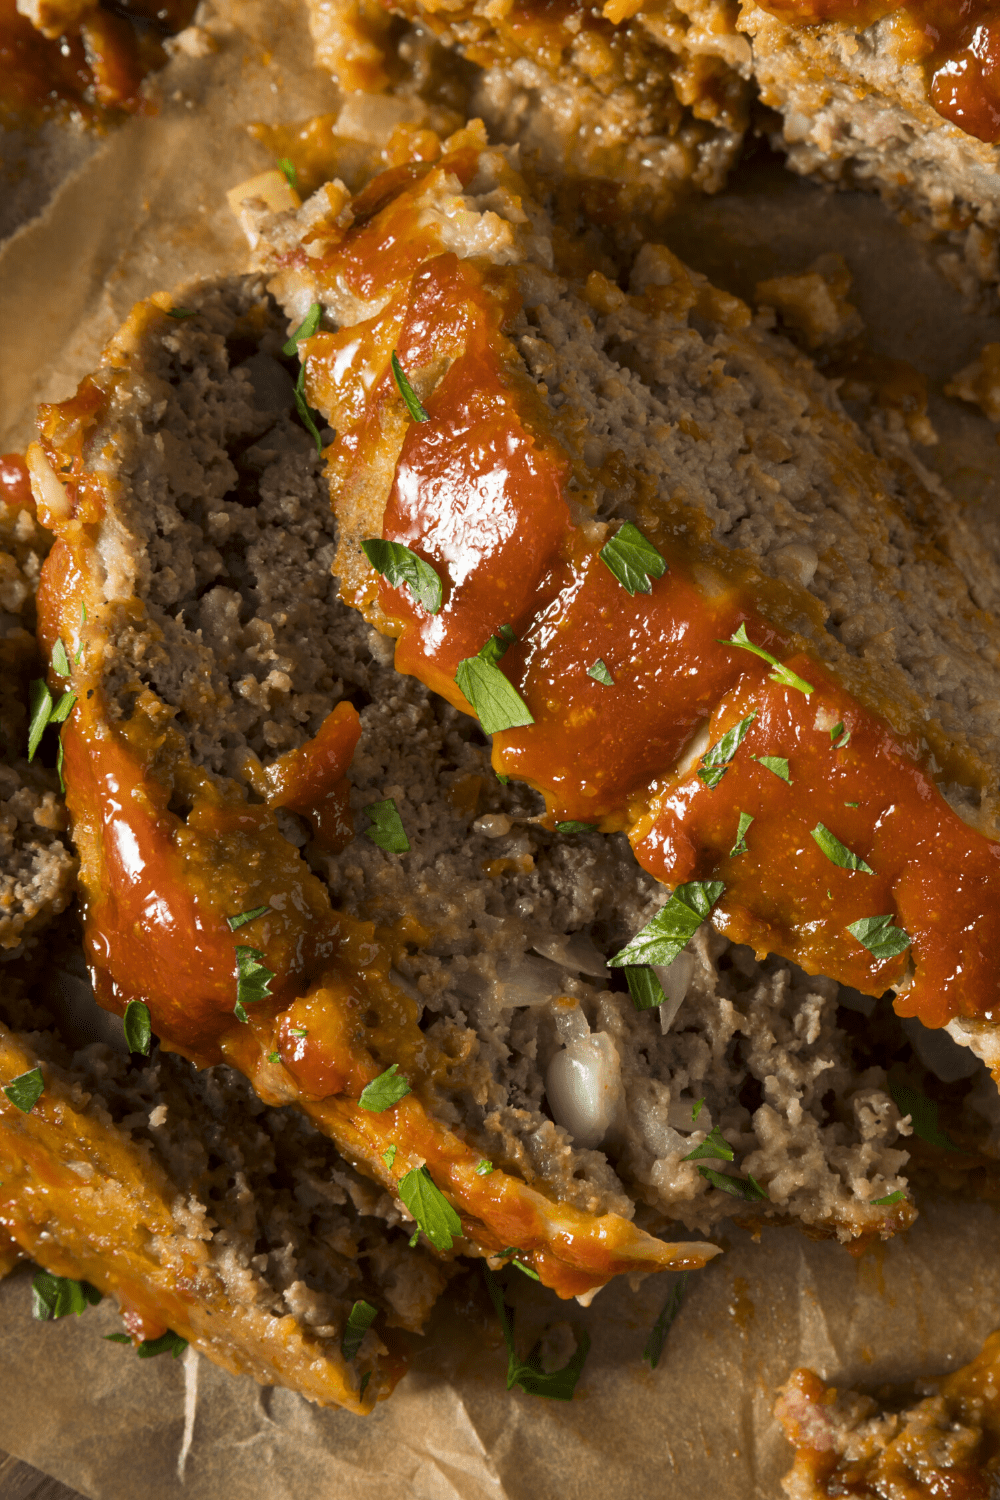 Sliced Meatloaf with ketchup on a parchment paper garnished with chopped parsley